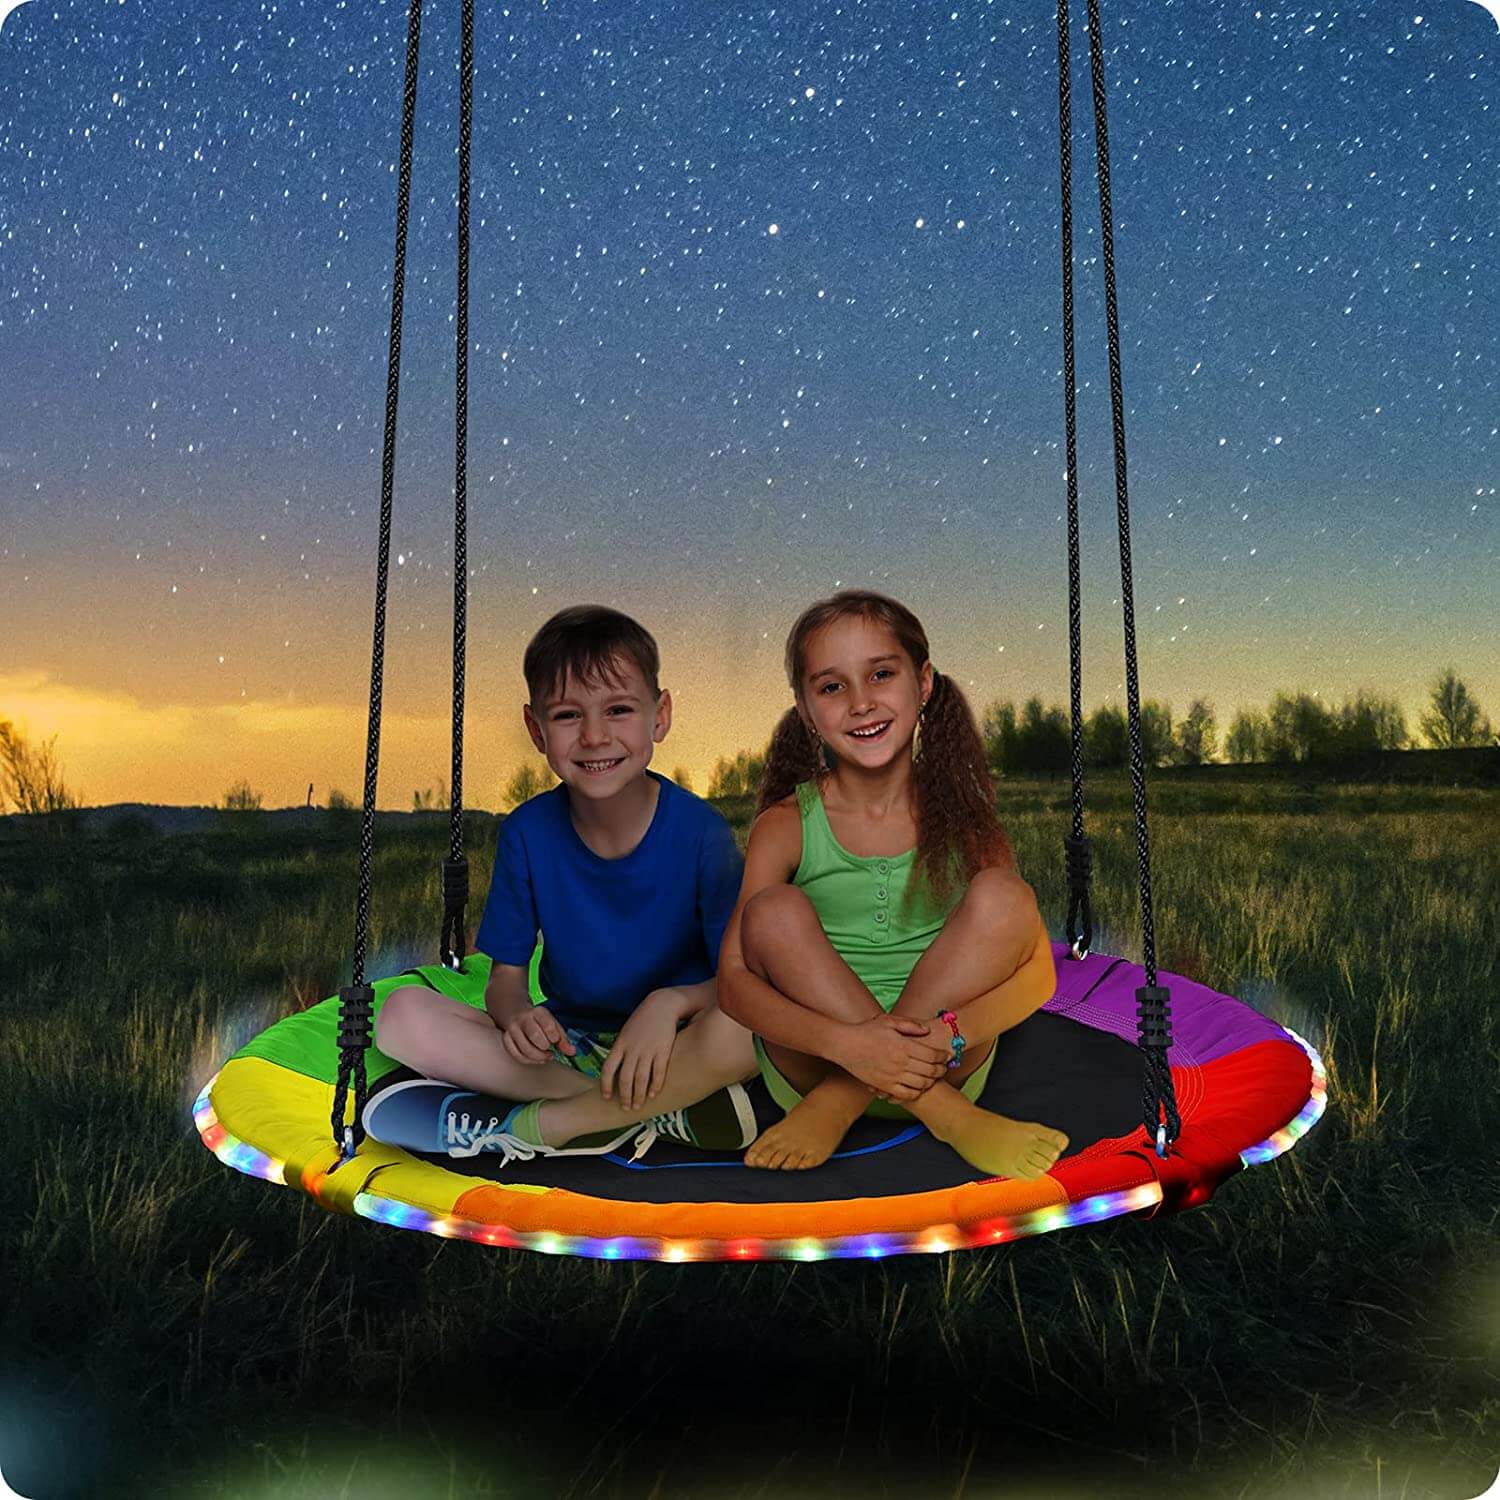 Trekassy 700lbs 40 Inch Saucer Tree Swing Outdoor with LED Lights